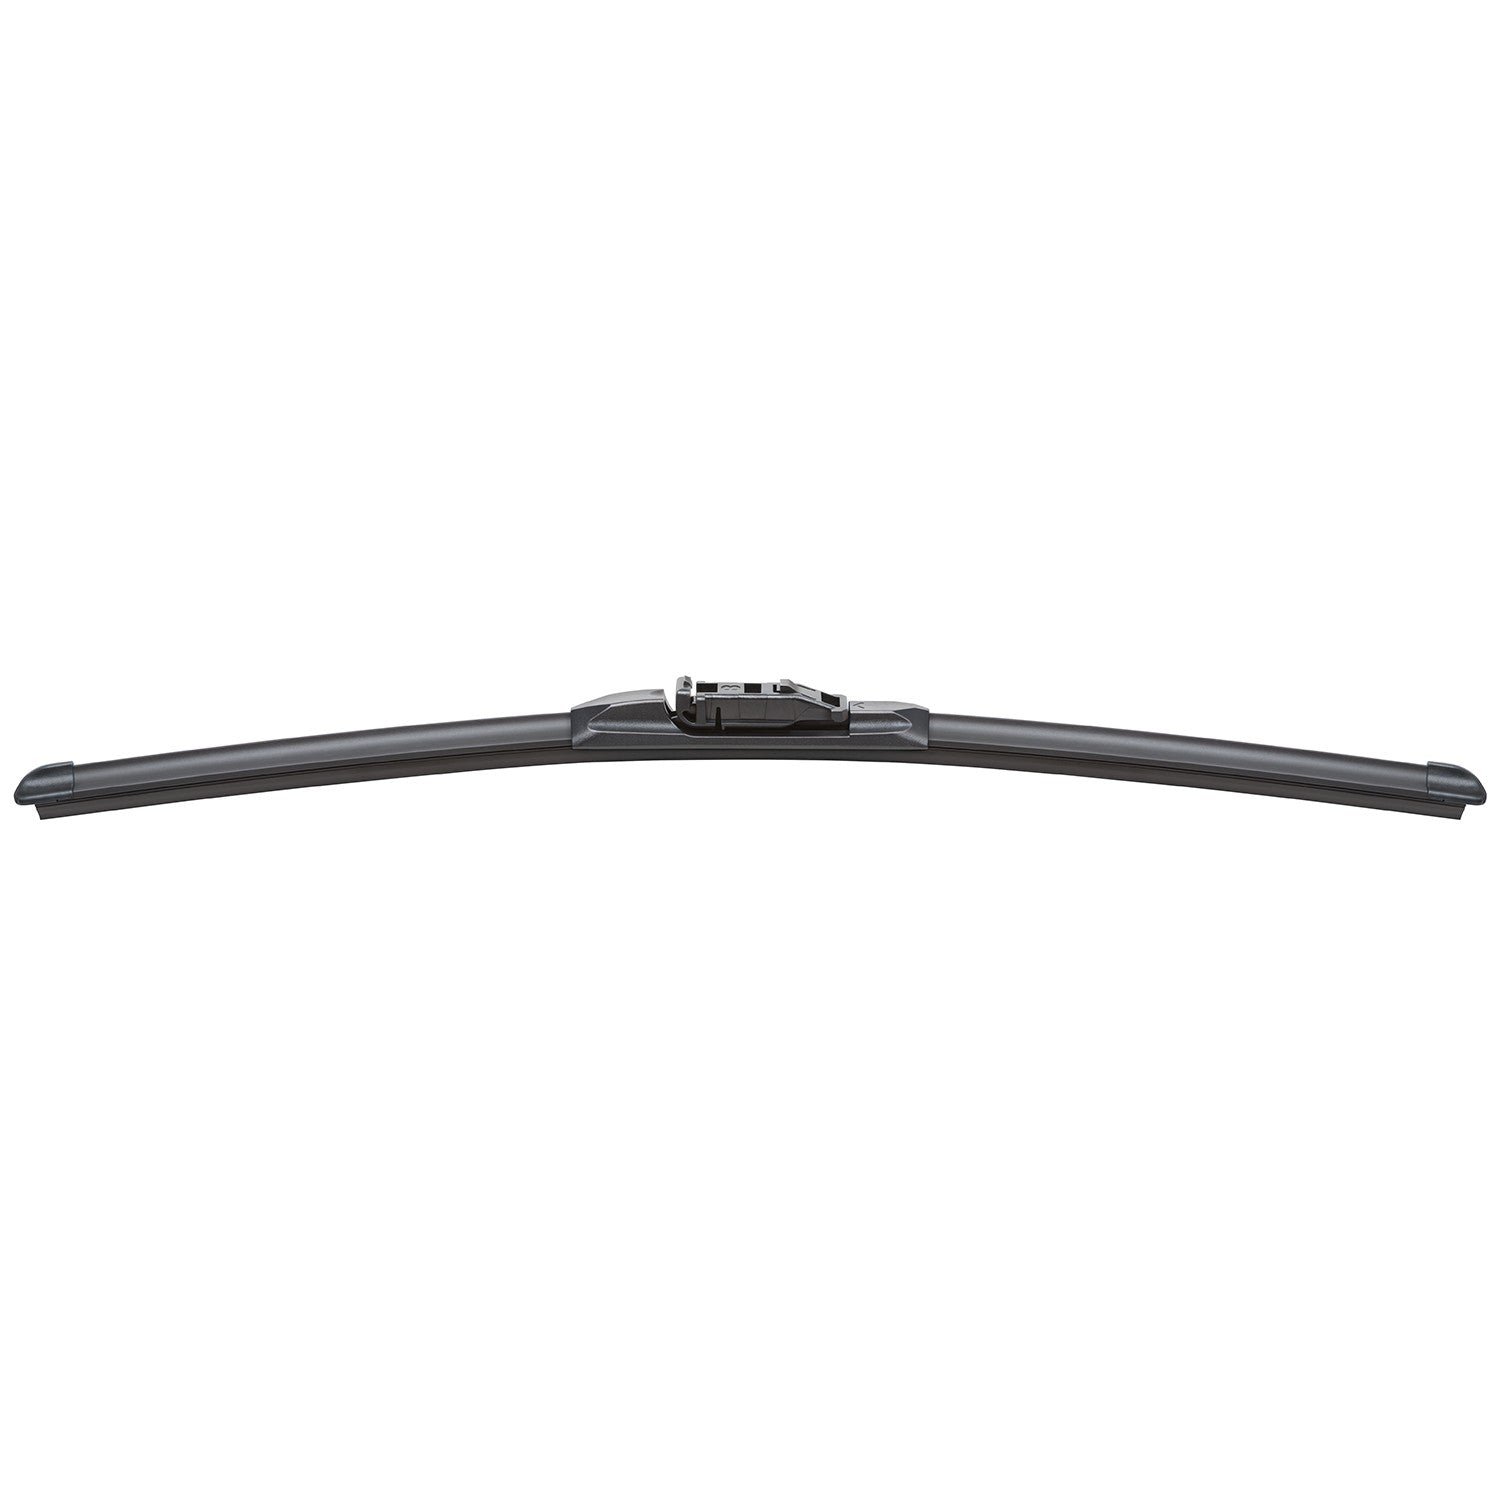 TRICO Exact Fit Windshield Wiper Blade  top view frsport 19-15B